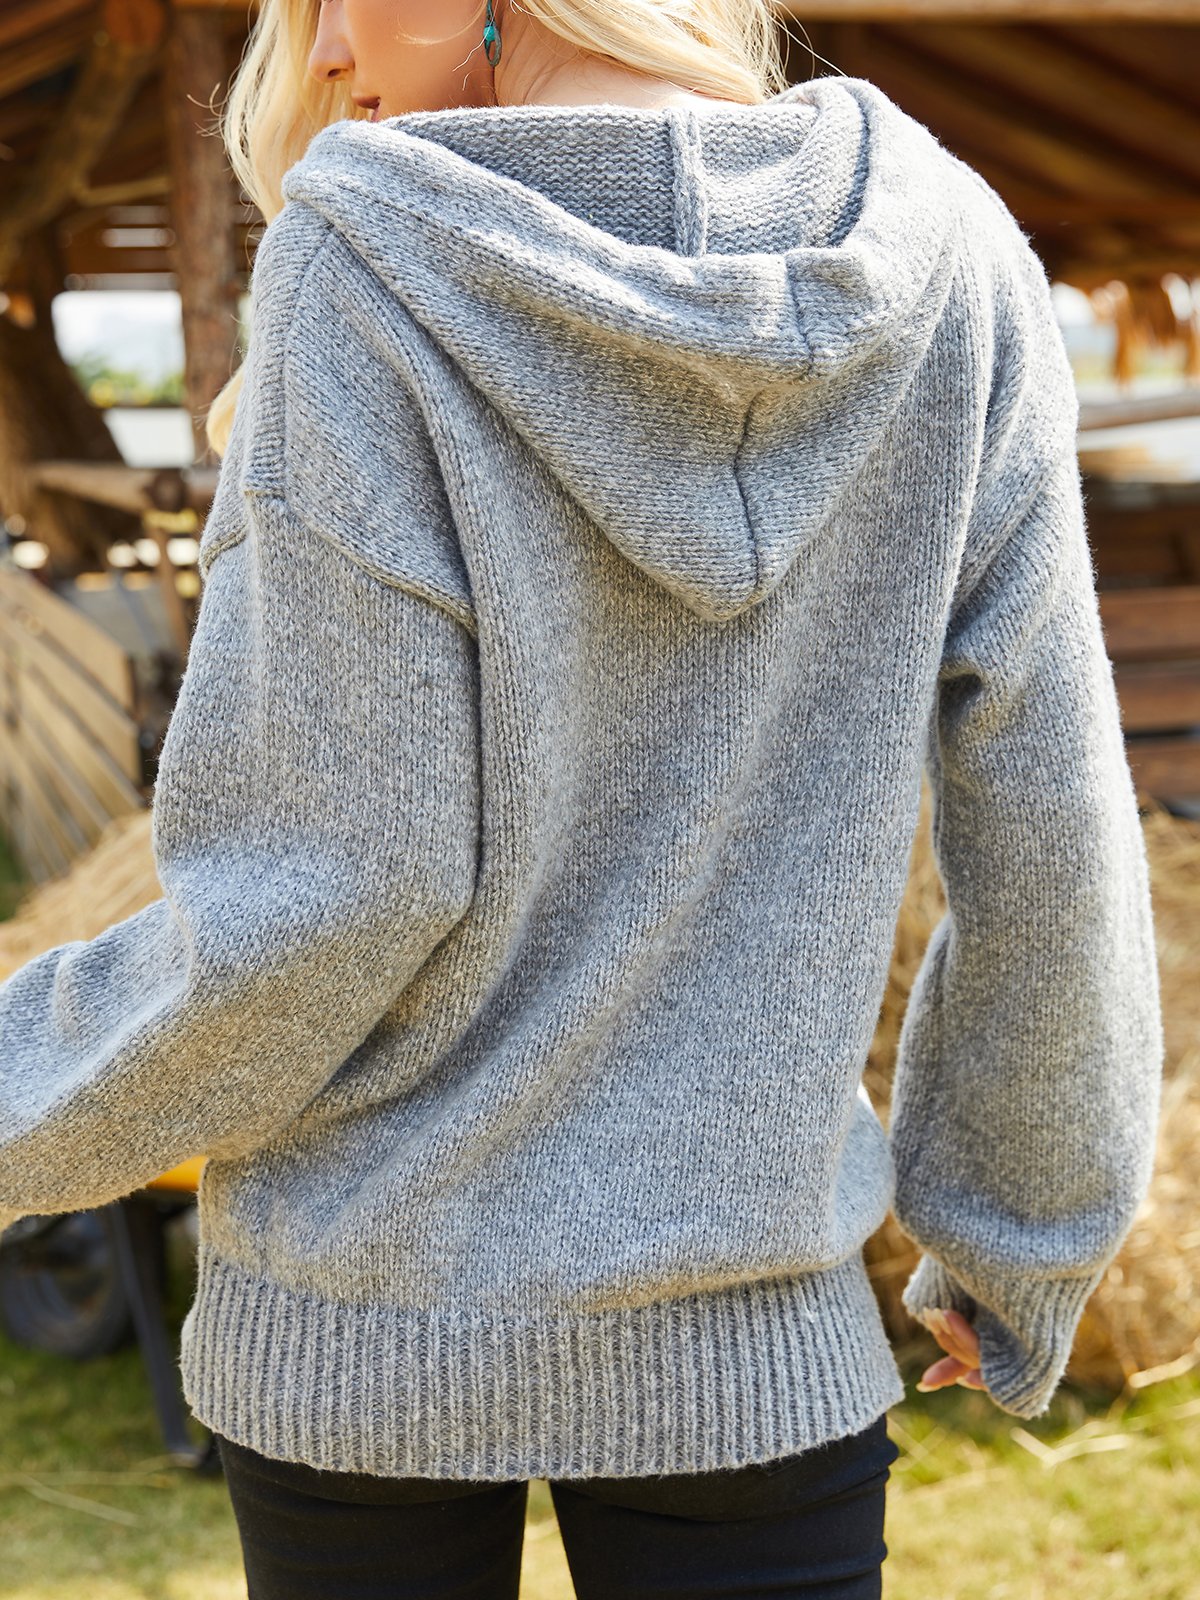 Winter Hooded Cardigan Button Up Knit Sweater Coat Outerwear with Pockets